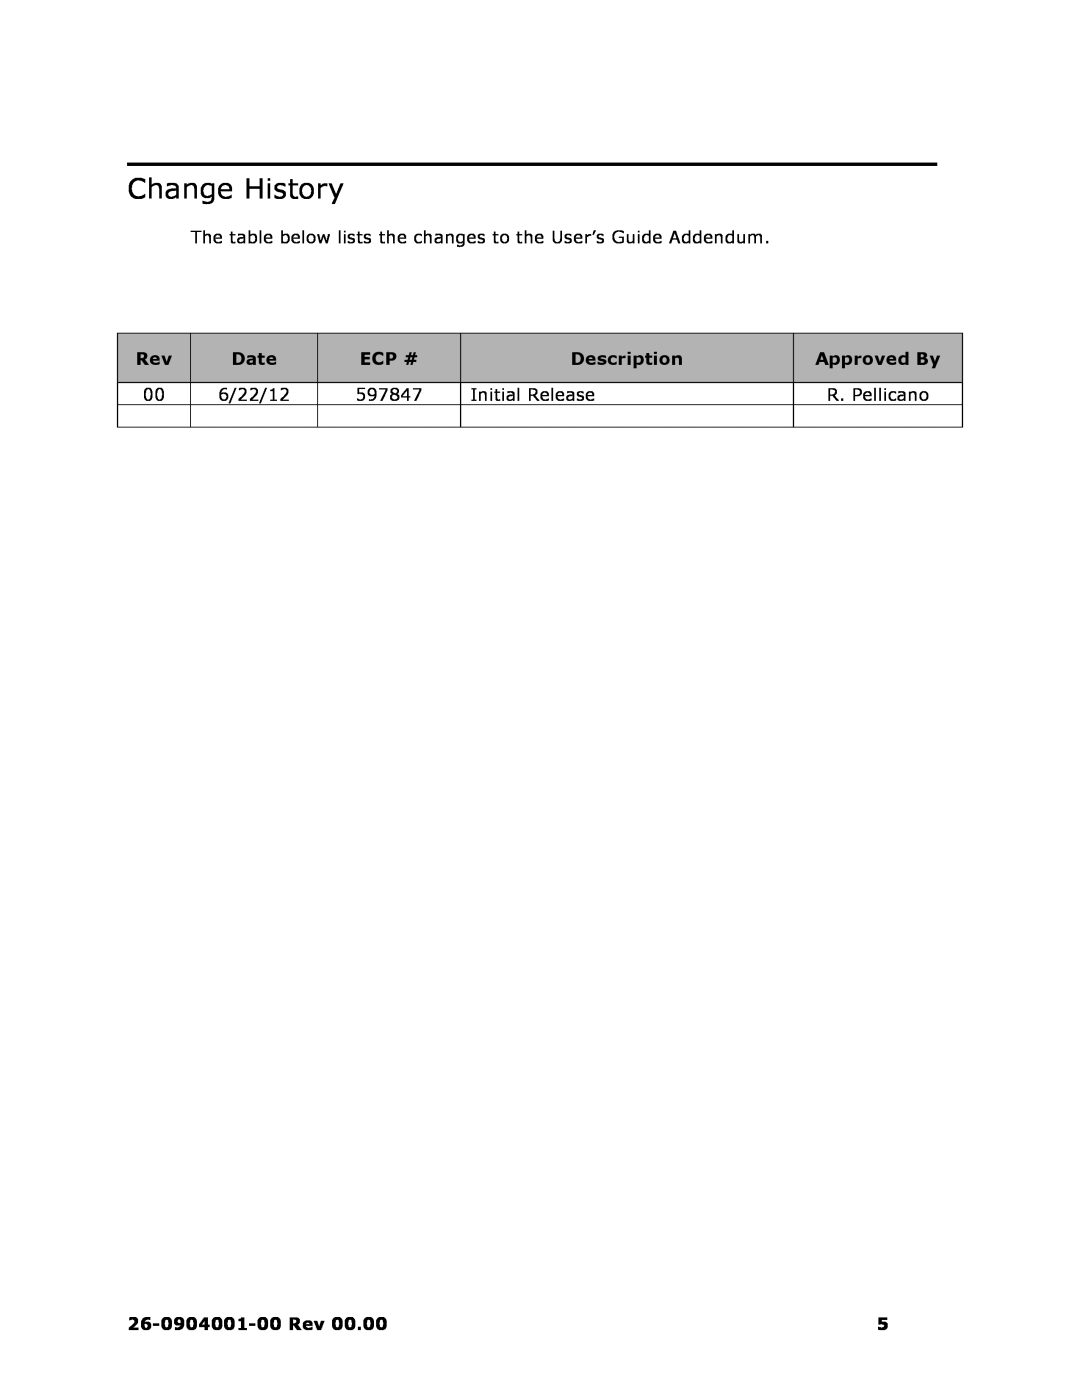 Barco II manual Change History, Date, Ecp #, Description, Approved By, 6/22/12, 597847, Initial Release, 26-0904001-00 Rev 